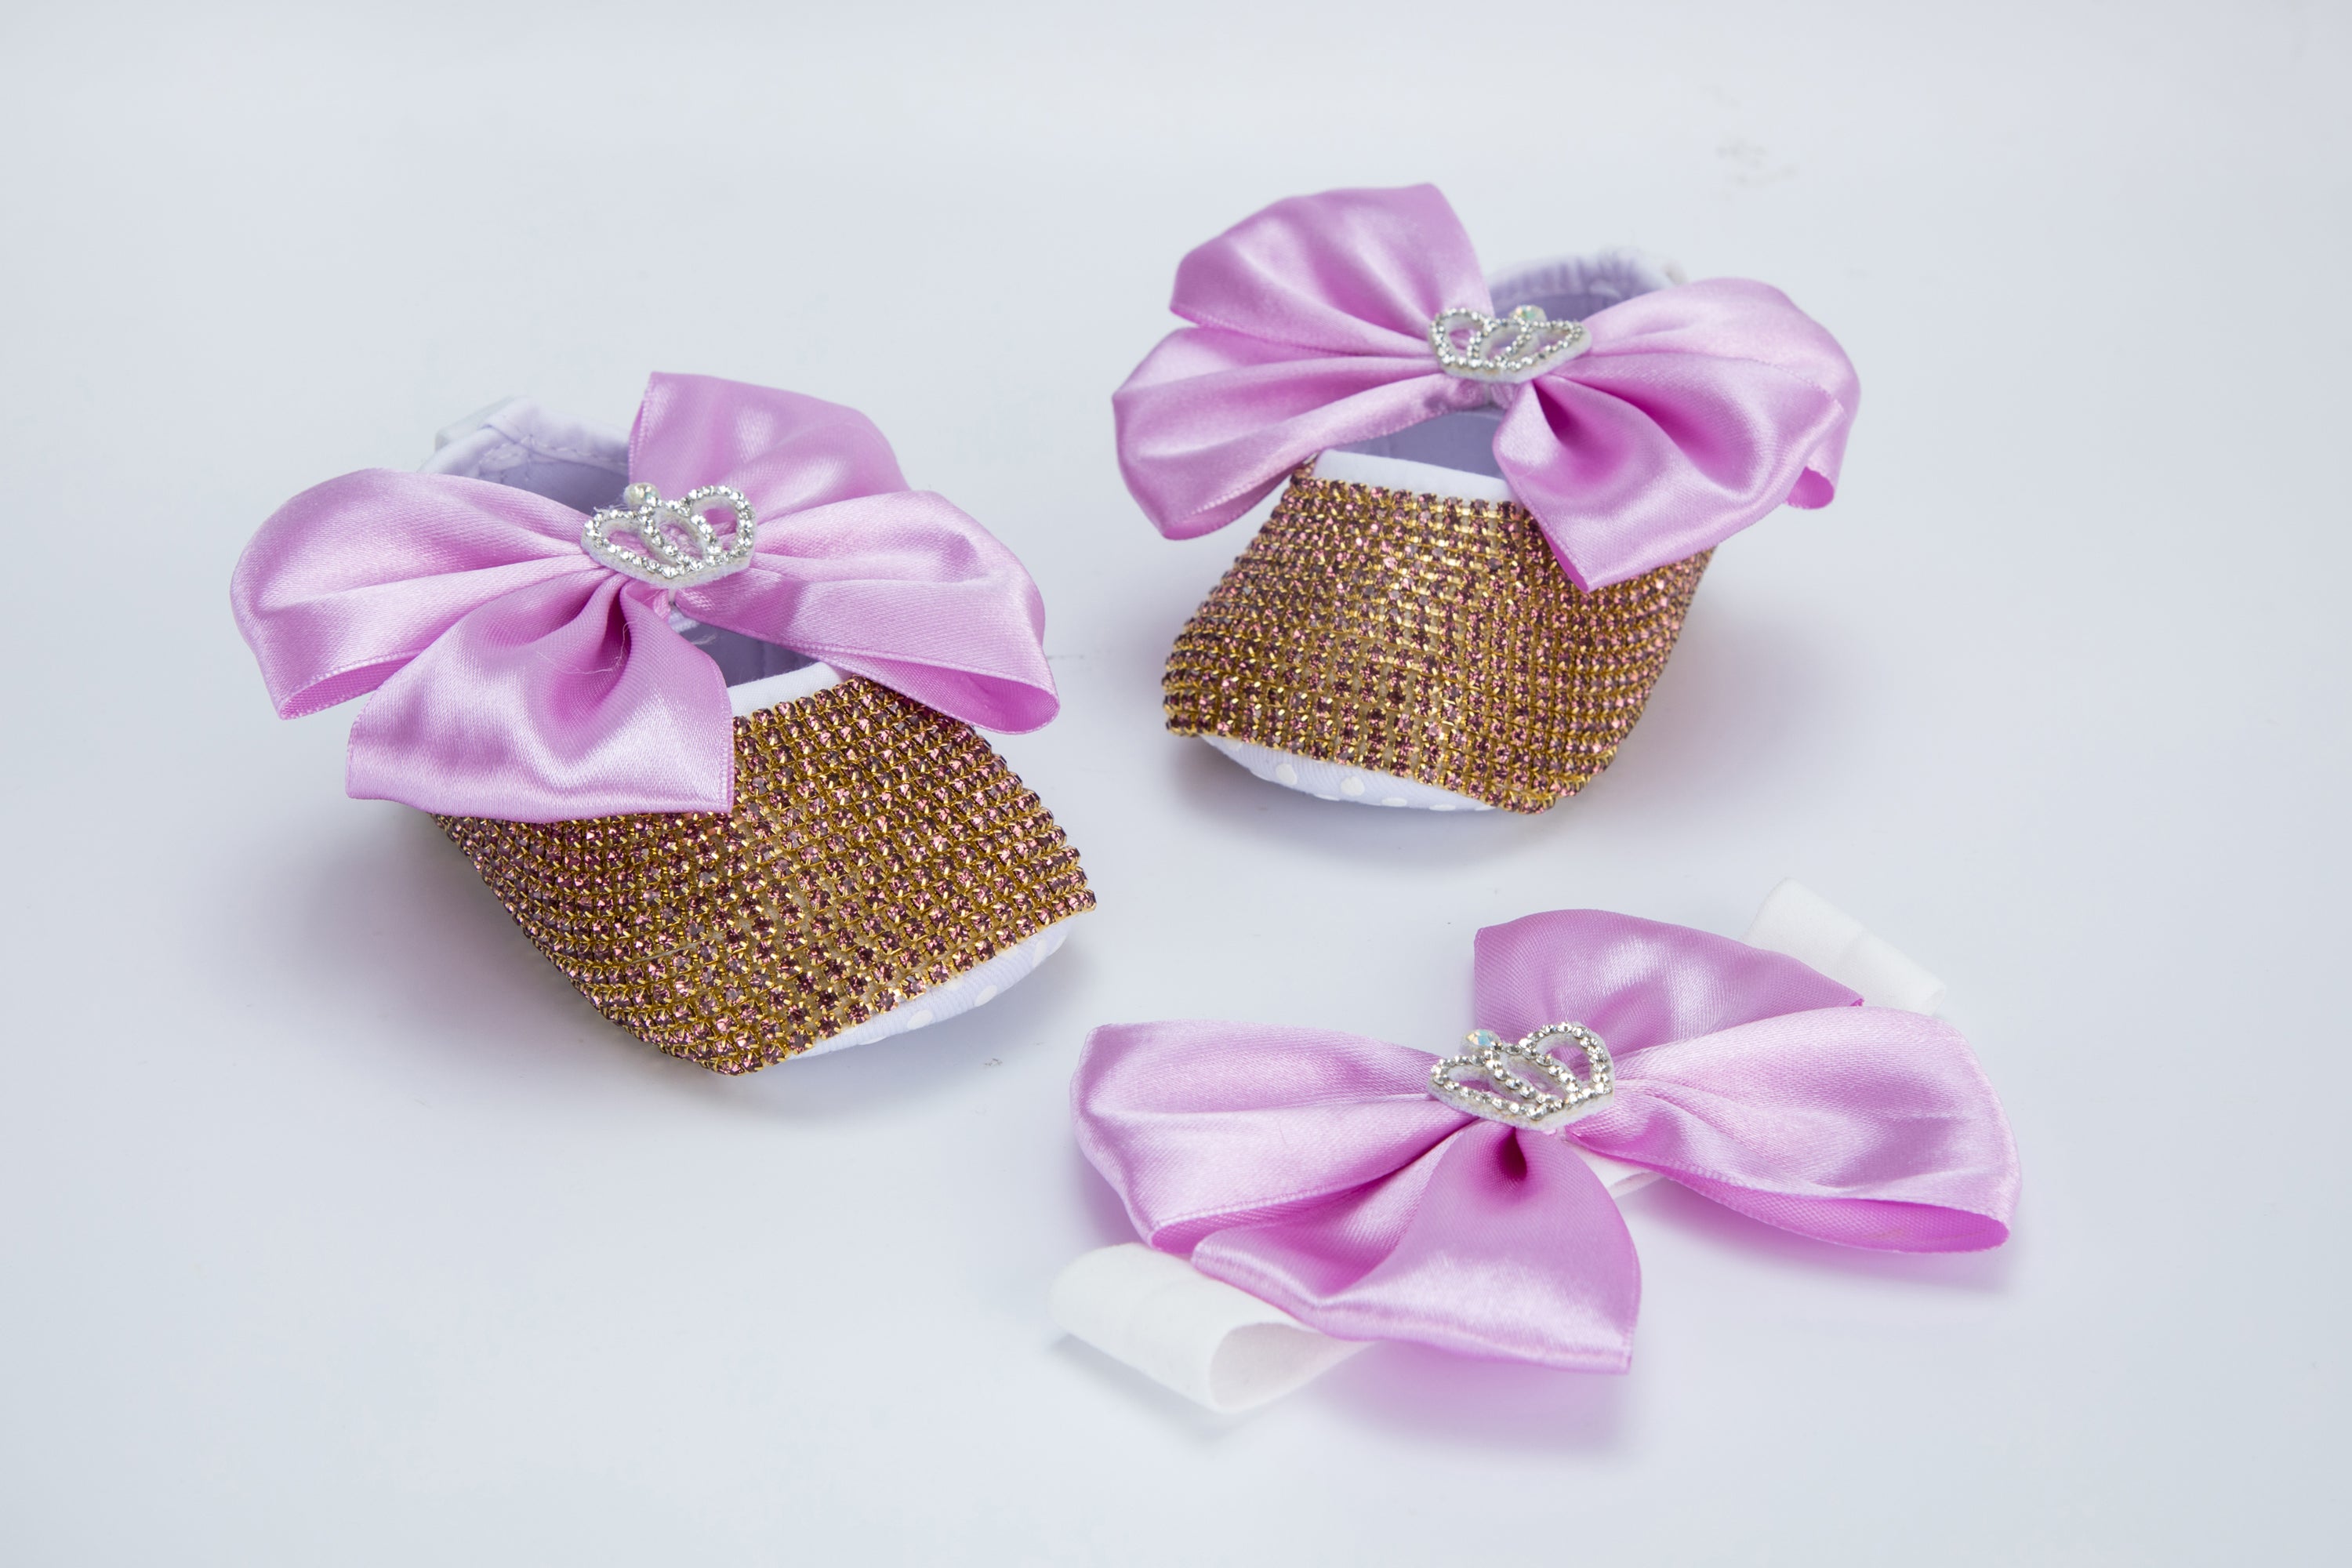 Kate 11cm Baby Shoes Crown Jewelry Rhinestone Big Bow with Headband Band Photo Props